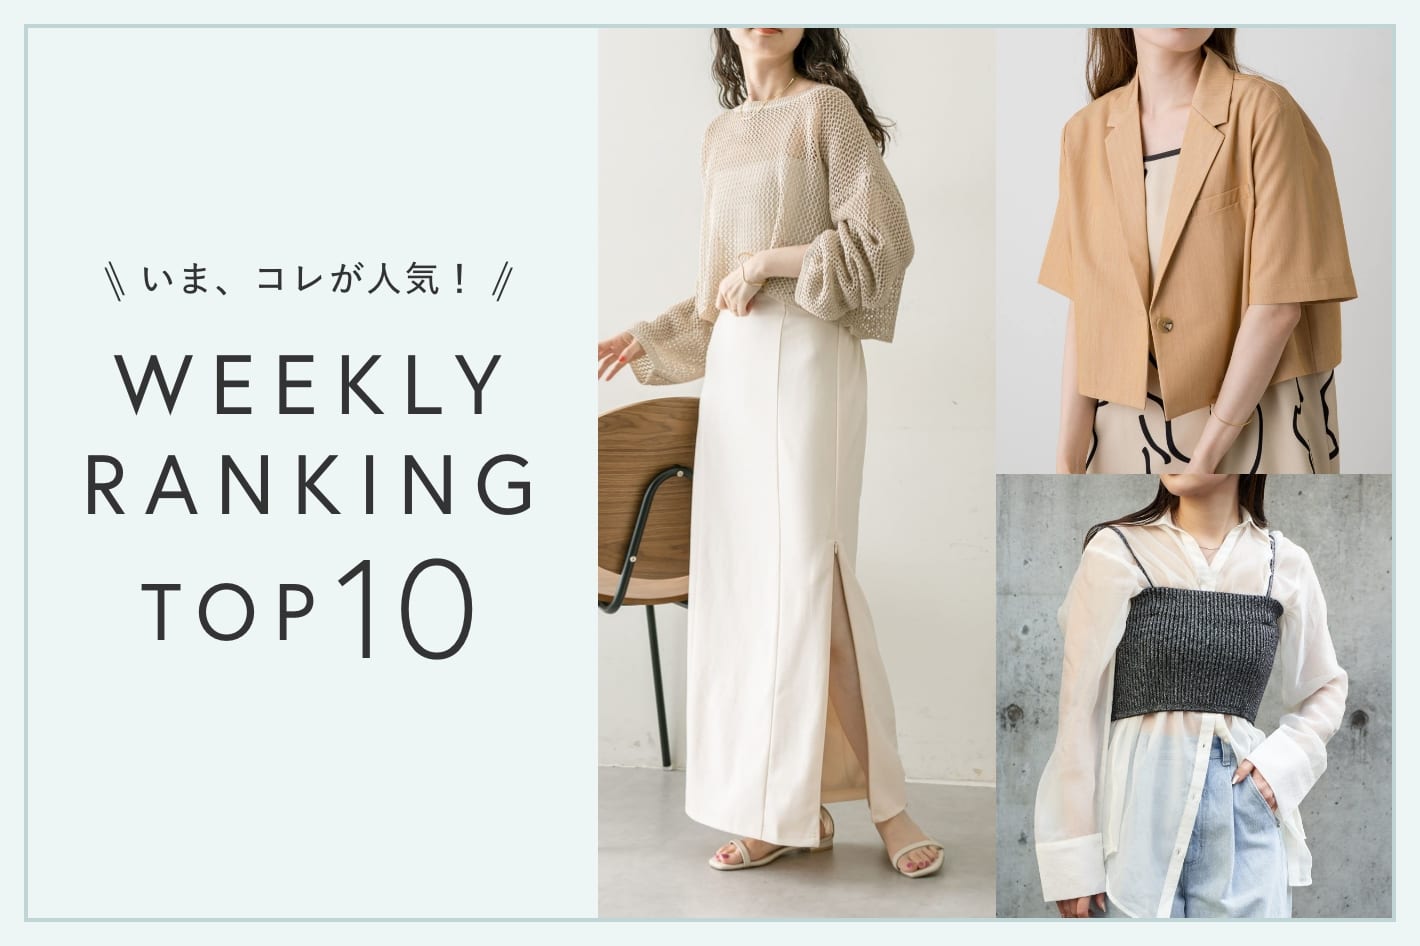 OUTLET いま、これが人気！WEEKLY RANKING TOP10【4/17更新】